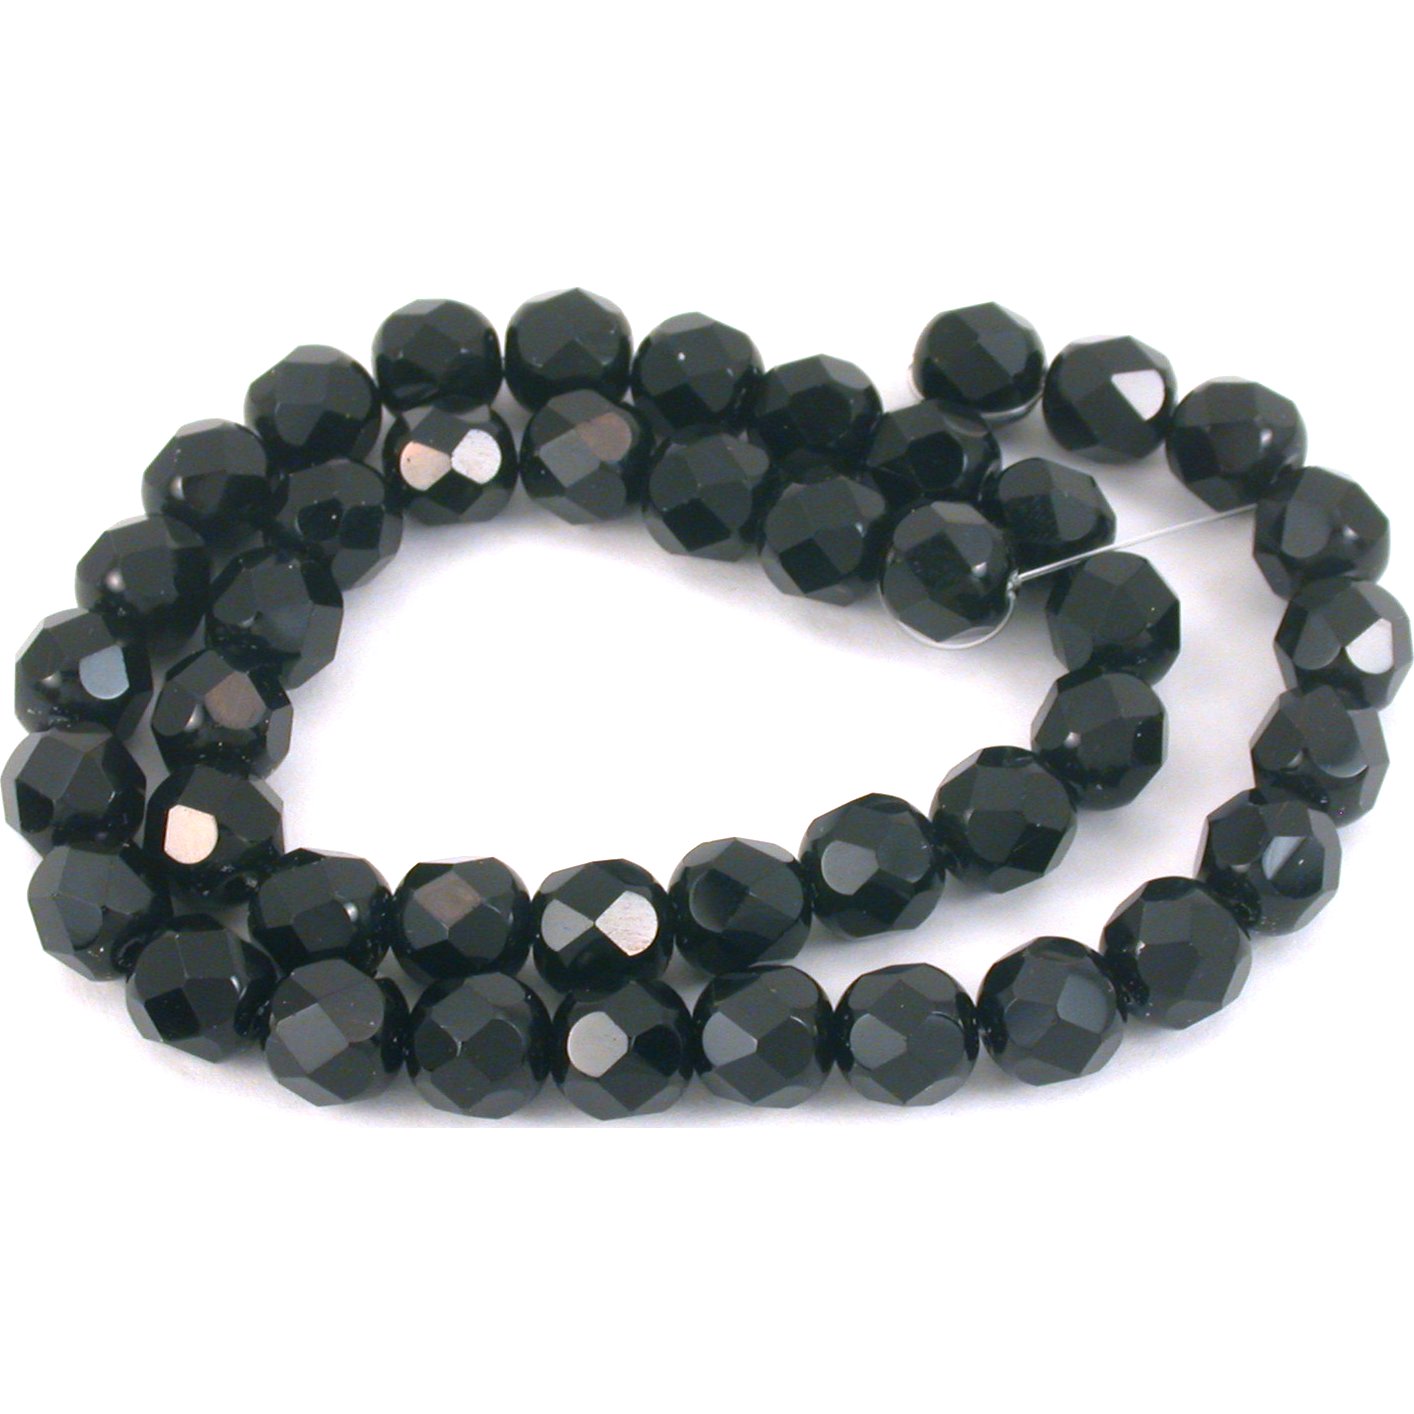 Round Faceted Fire Polished Chinese Crystal Beads Black 8mm 1 Strand